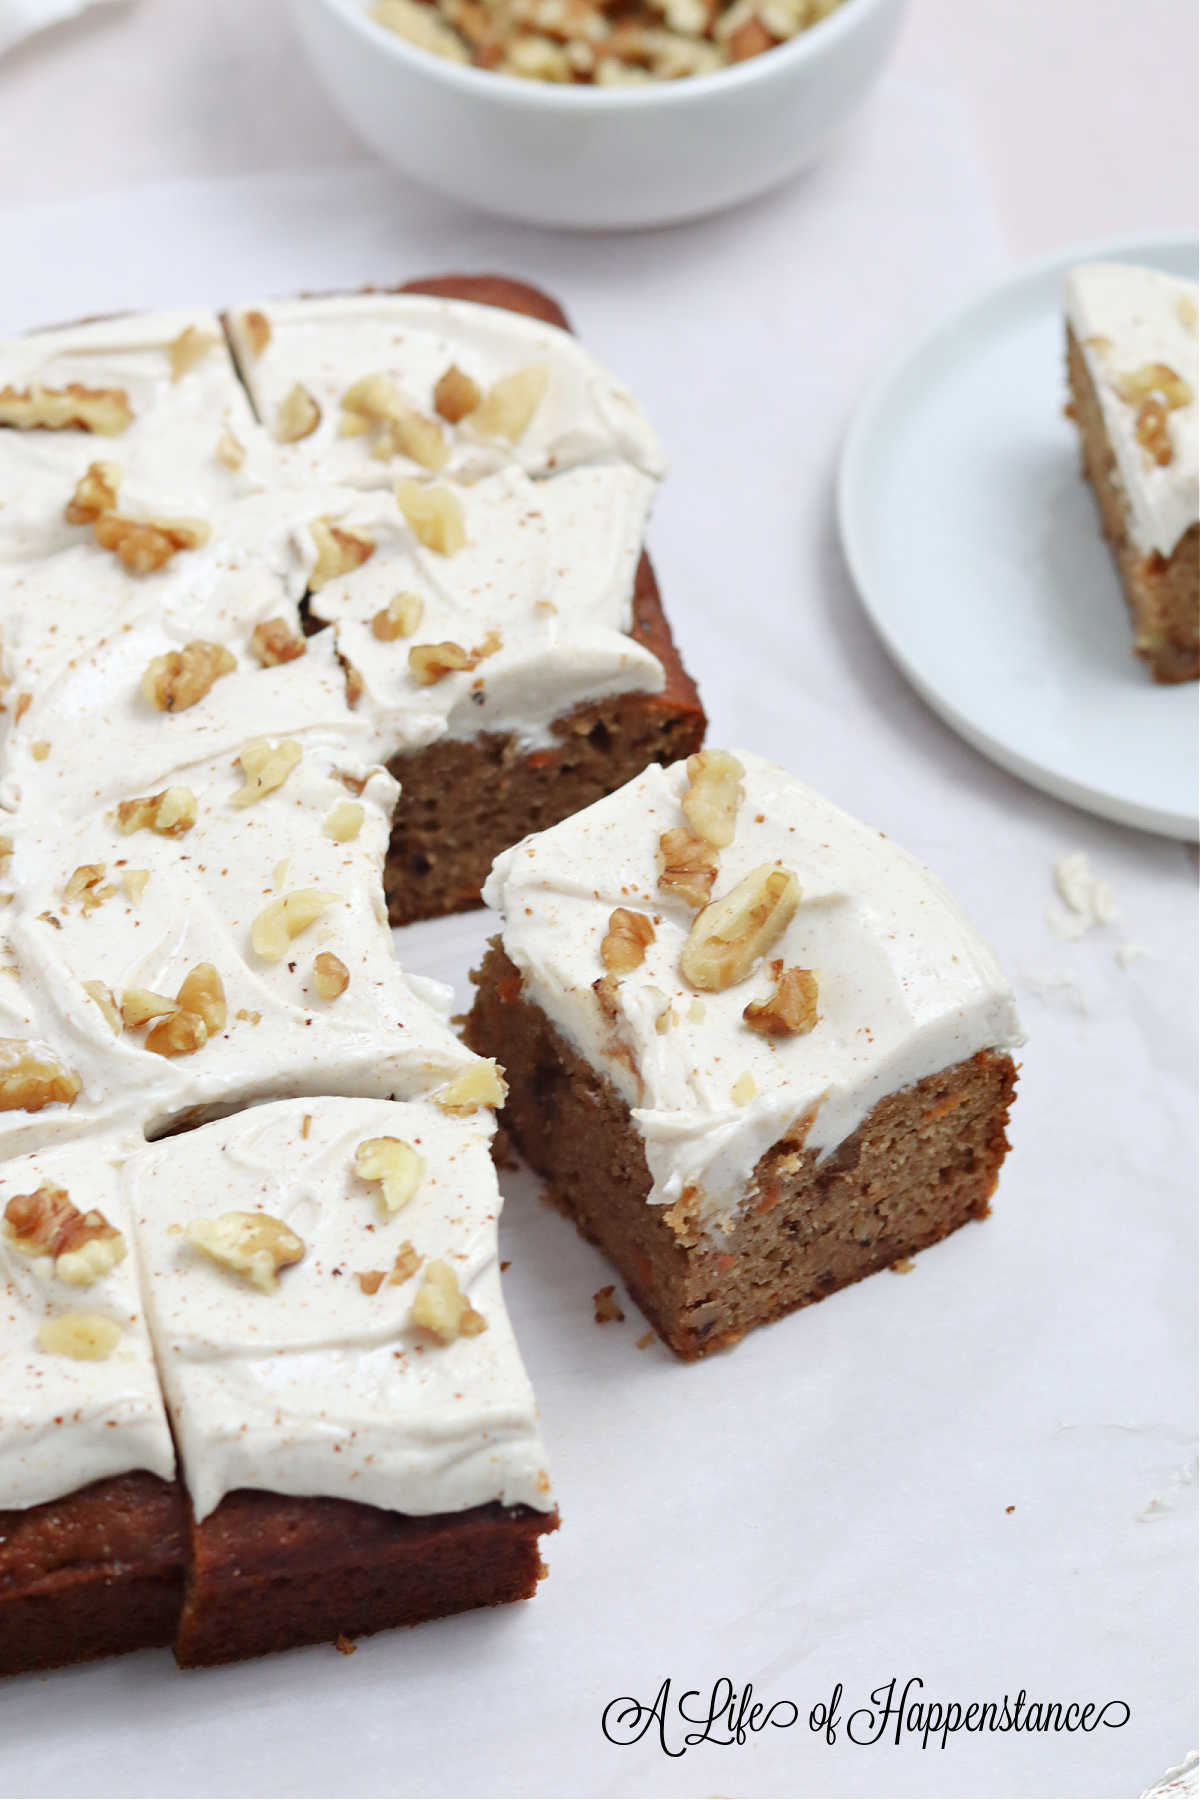 Sliced carrot cake on a table.